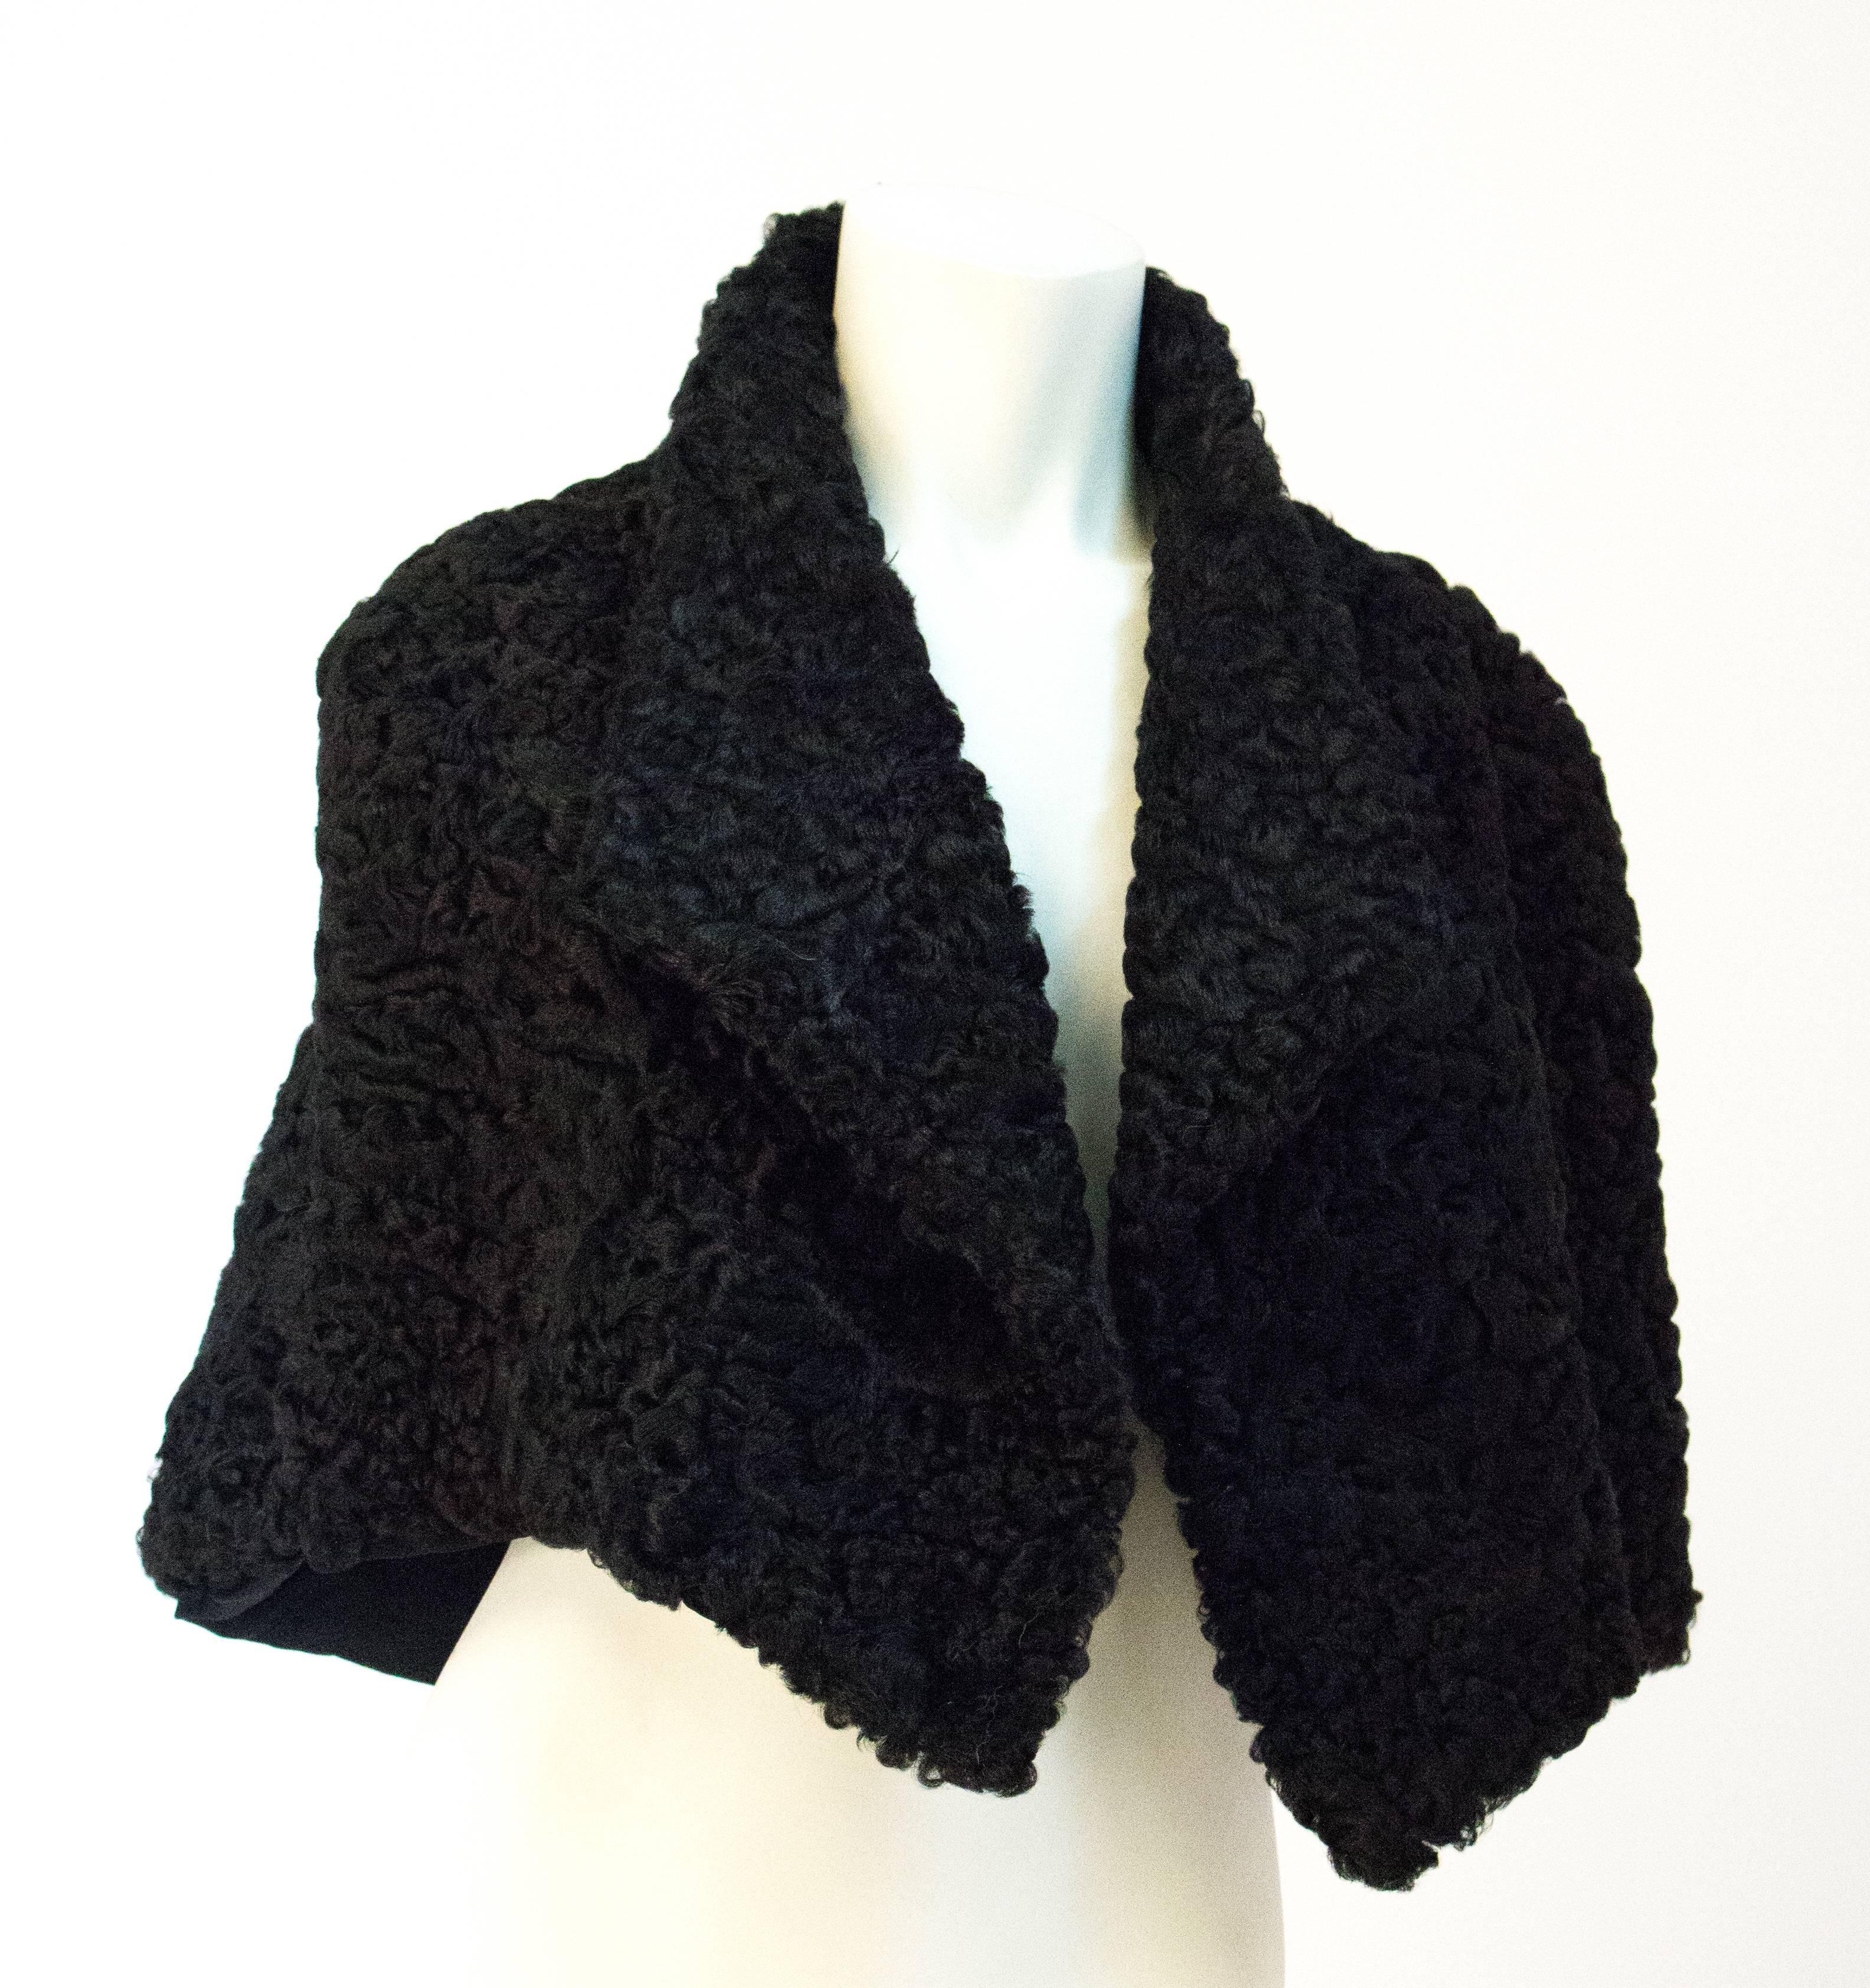 50s Black Persian Lamb Capelet. Interior pocket. Fully lined. 

Approximately a size small (US)